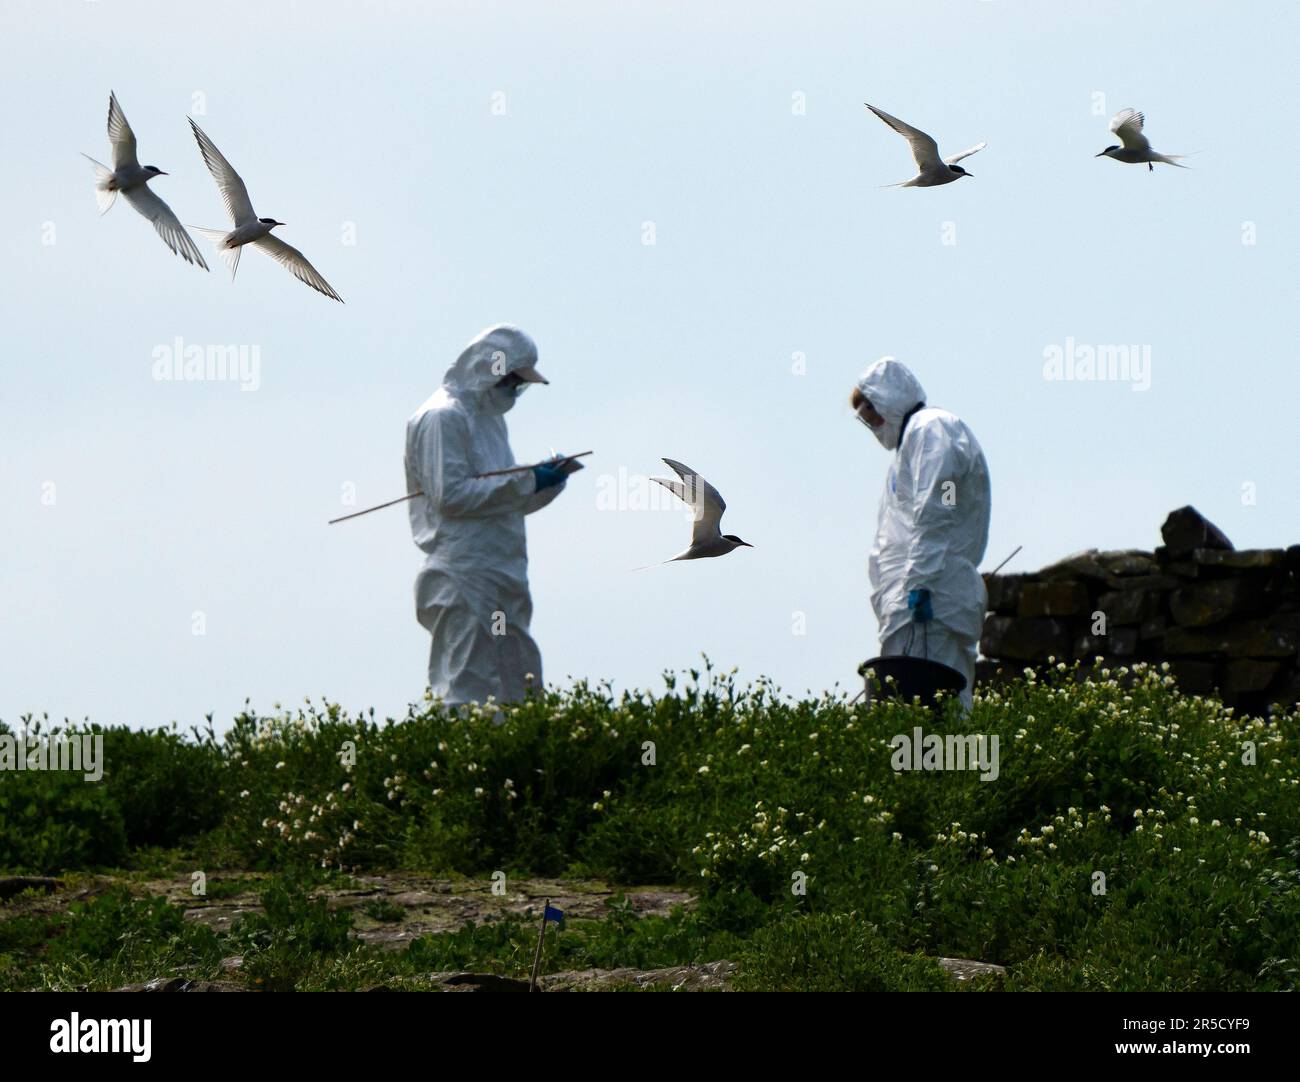 Northumberland, UK. 02nd June, 2023. National Trust Rangers wearing Hazmat suits to protect themselves from Avian (Bird) Flu monitor Arctic Terns on Brownsman Island in the Outer Farne Islands off the coast of Northumberland in Northern England. The seabird colonies of the Farne Islands were devastated by bird flu in 2022. Brownsman and some other Islands have been closed to visitors during the breeding season this year to give the birds the best chance of breeding successfully. Credit: Rob Taggart/Alamy Live News Stock Photo